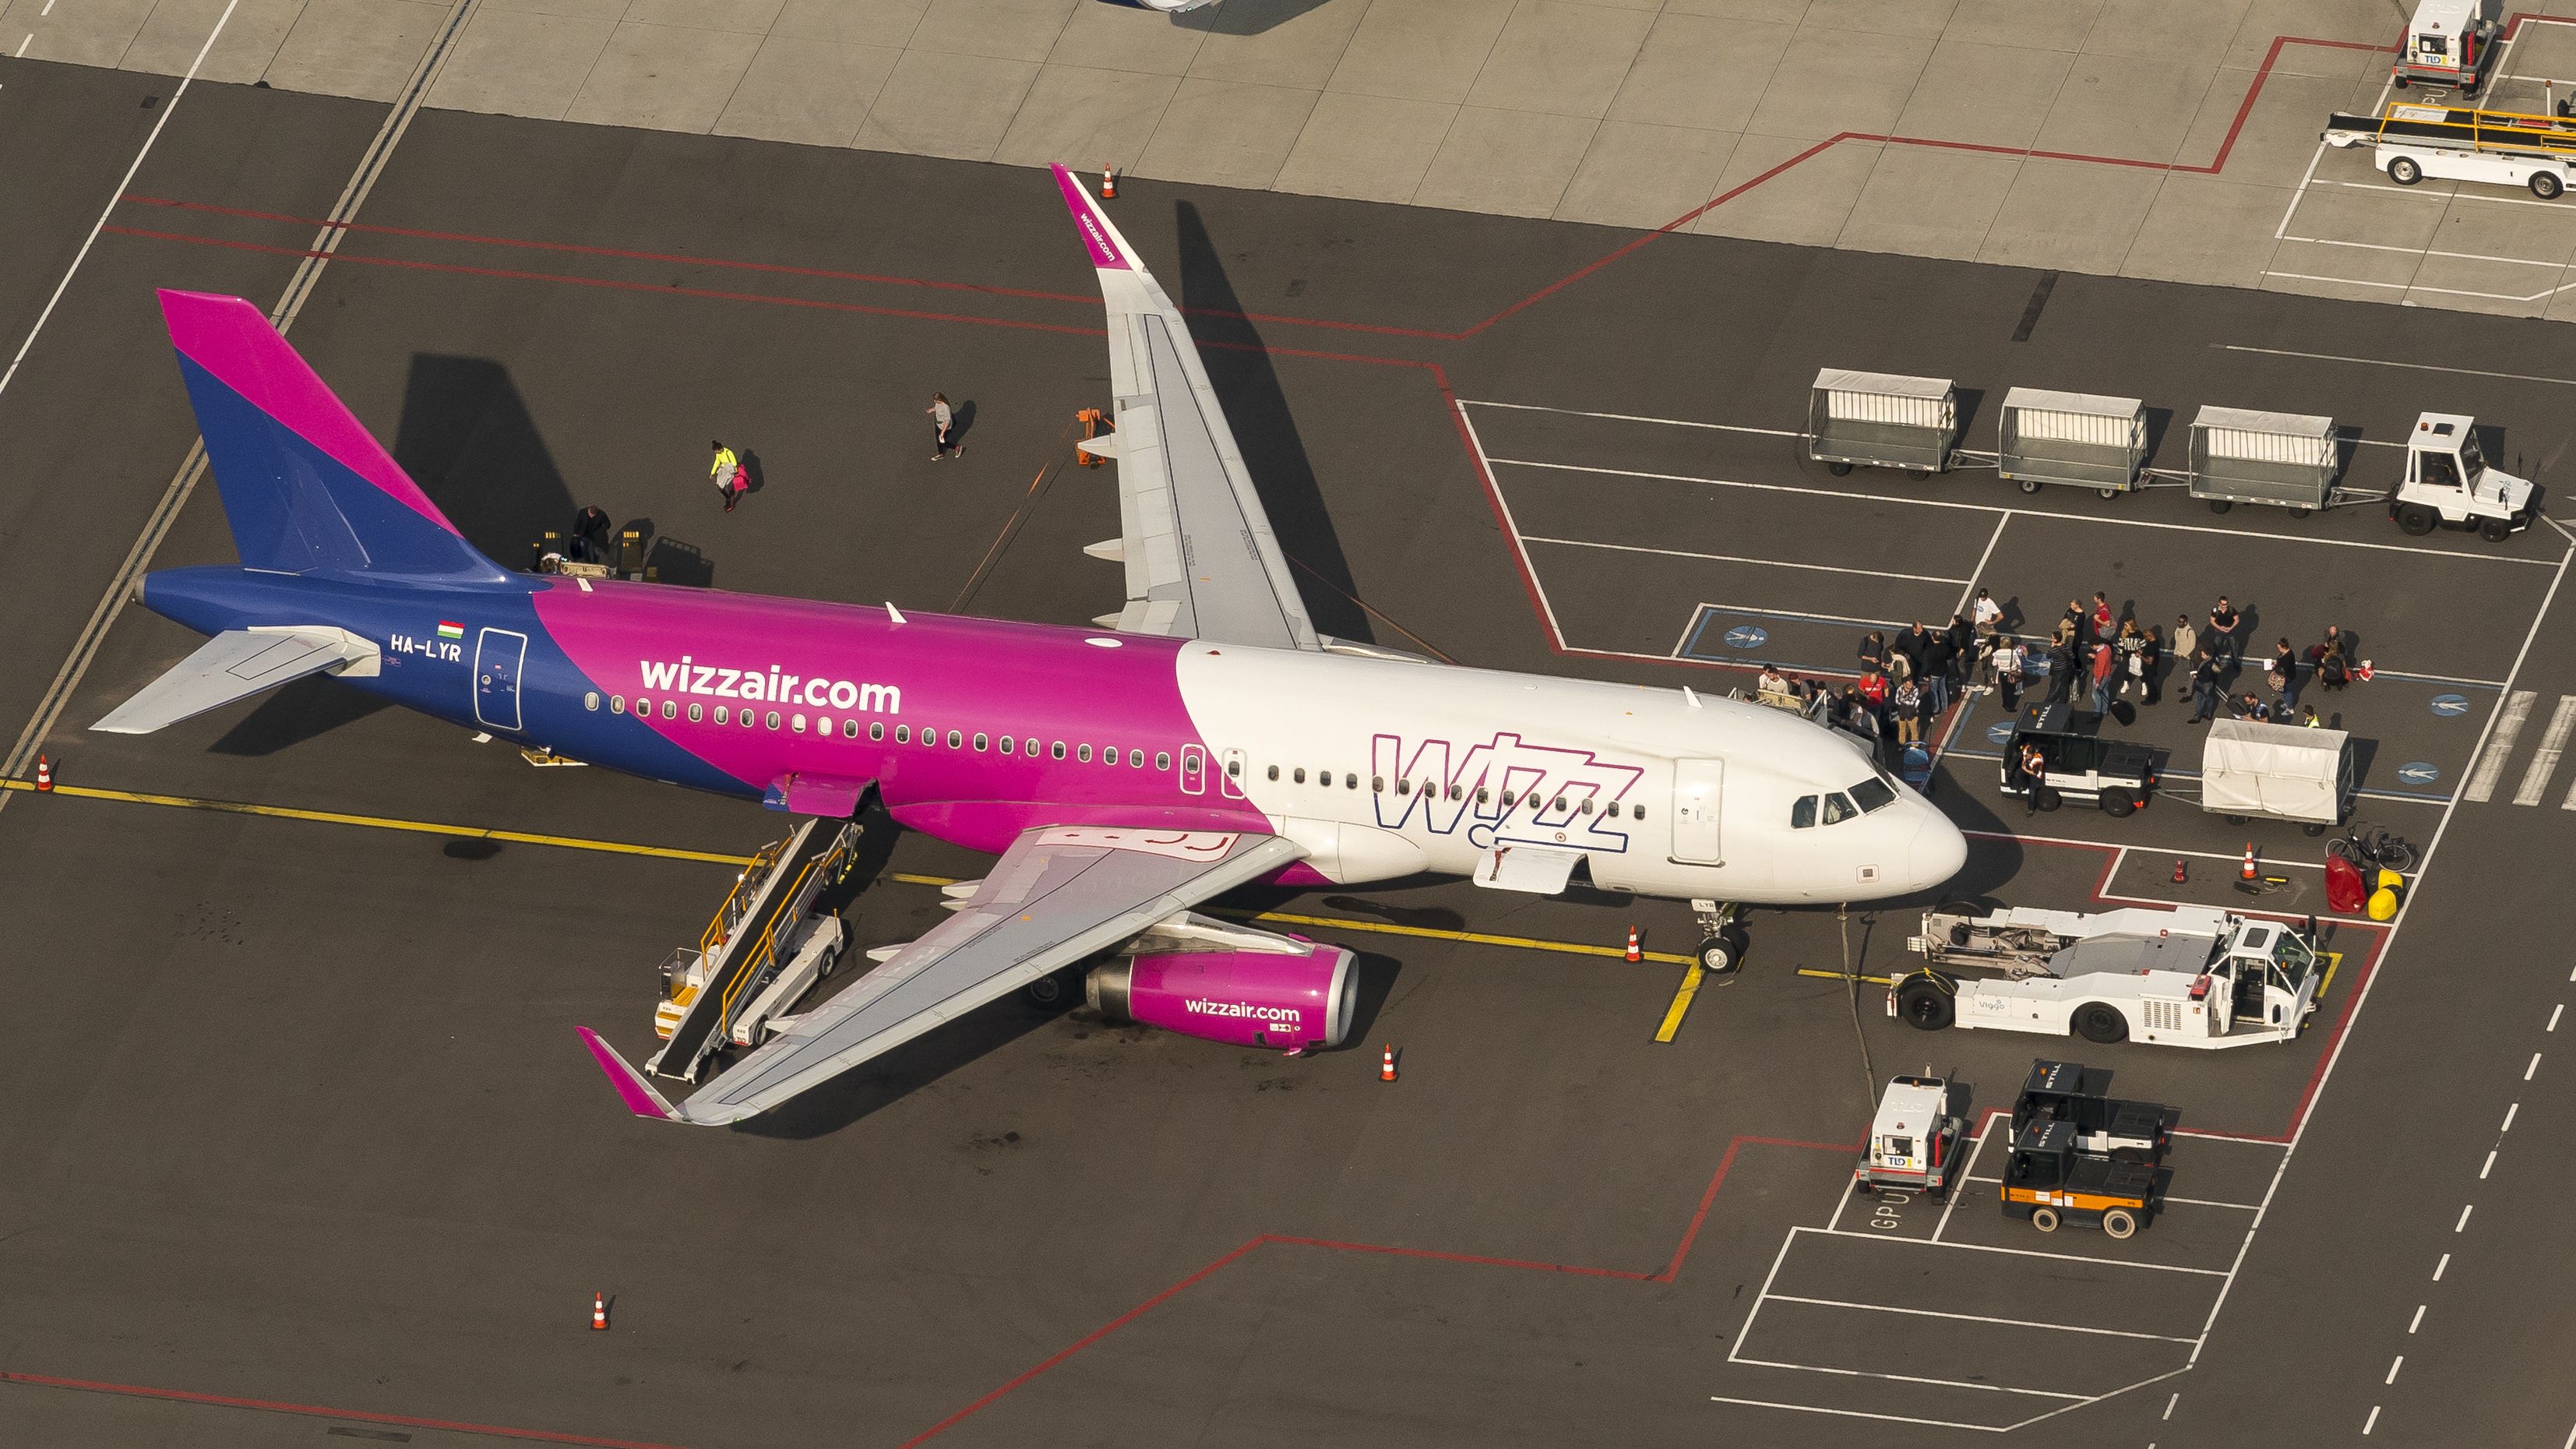 Wizz Air A320 at Eindhoven Airport